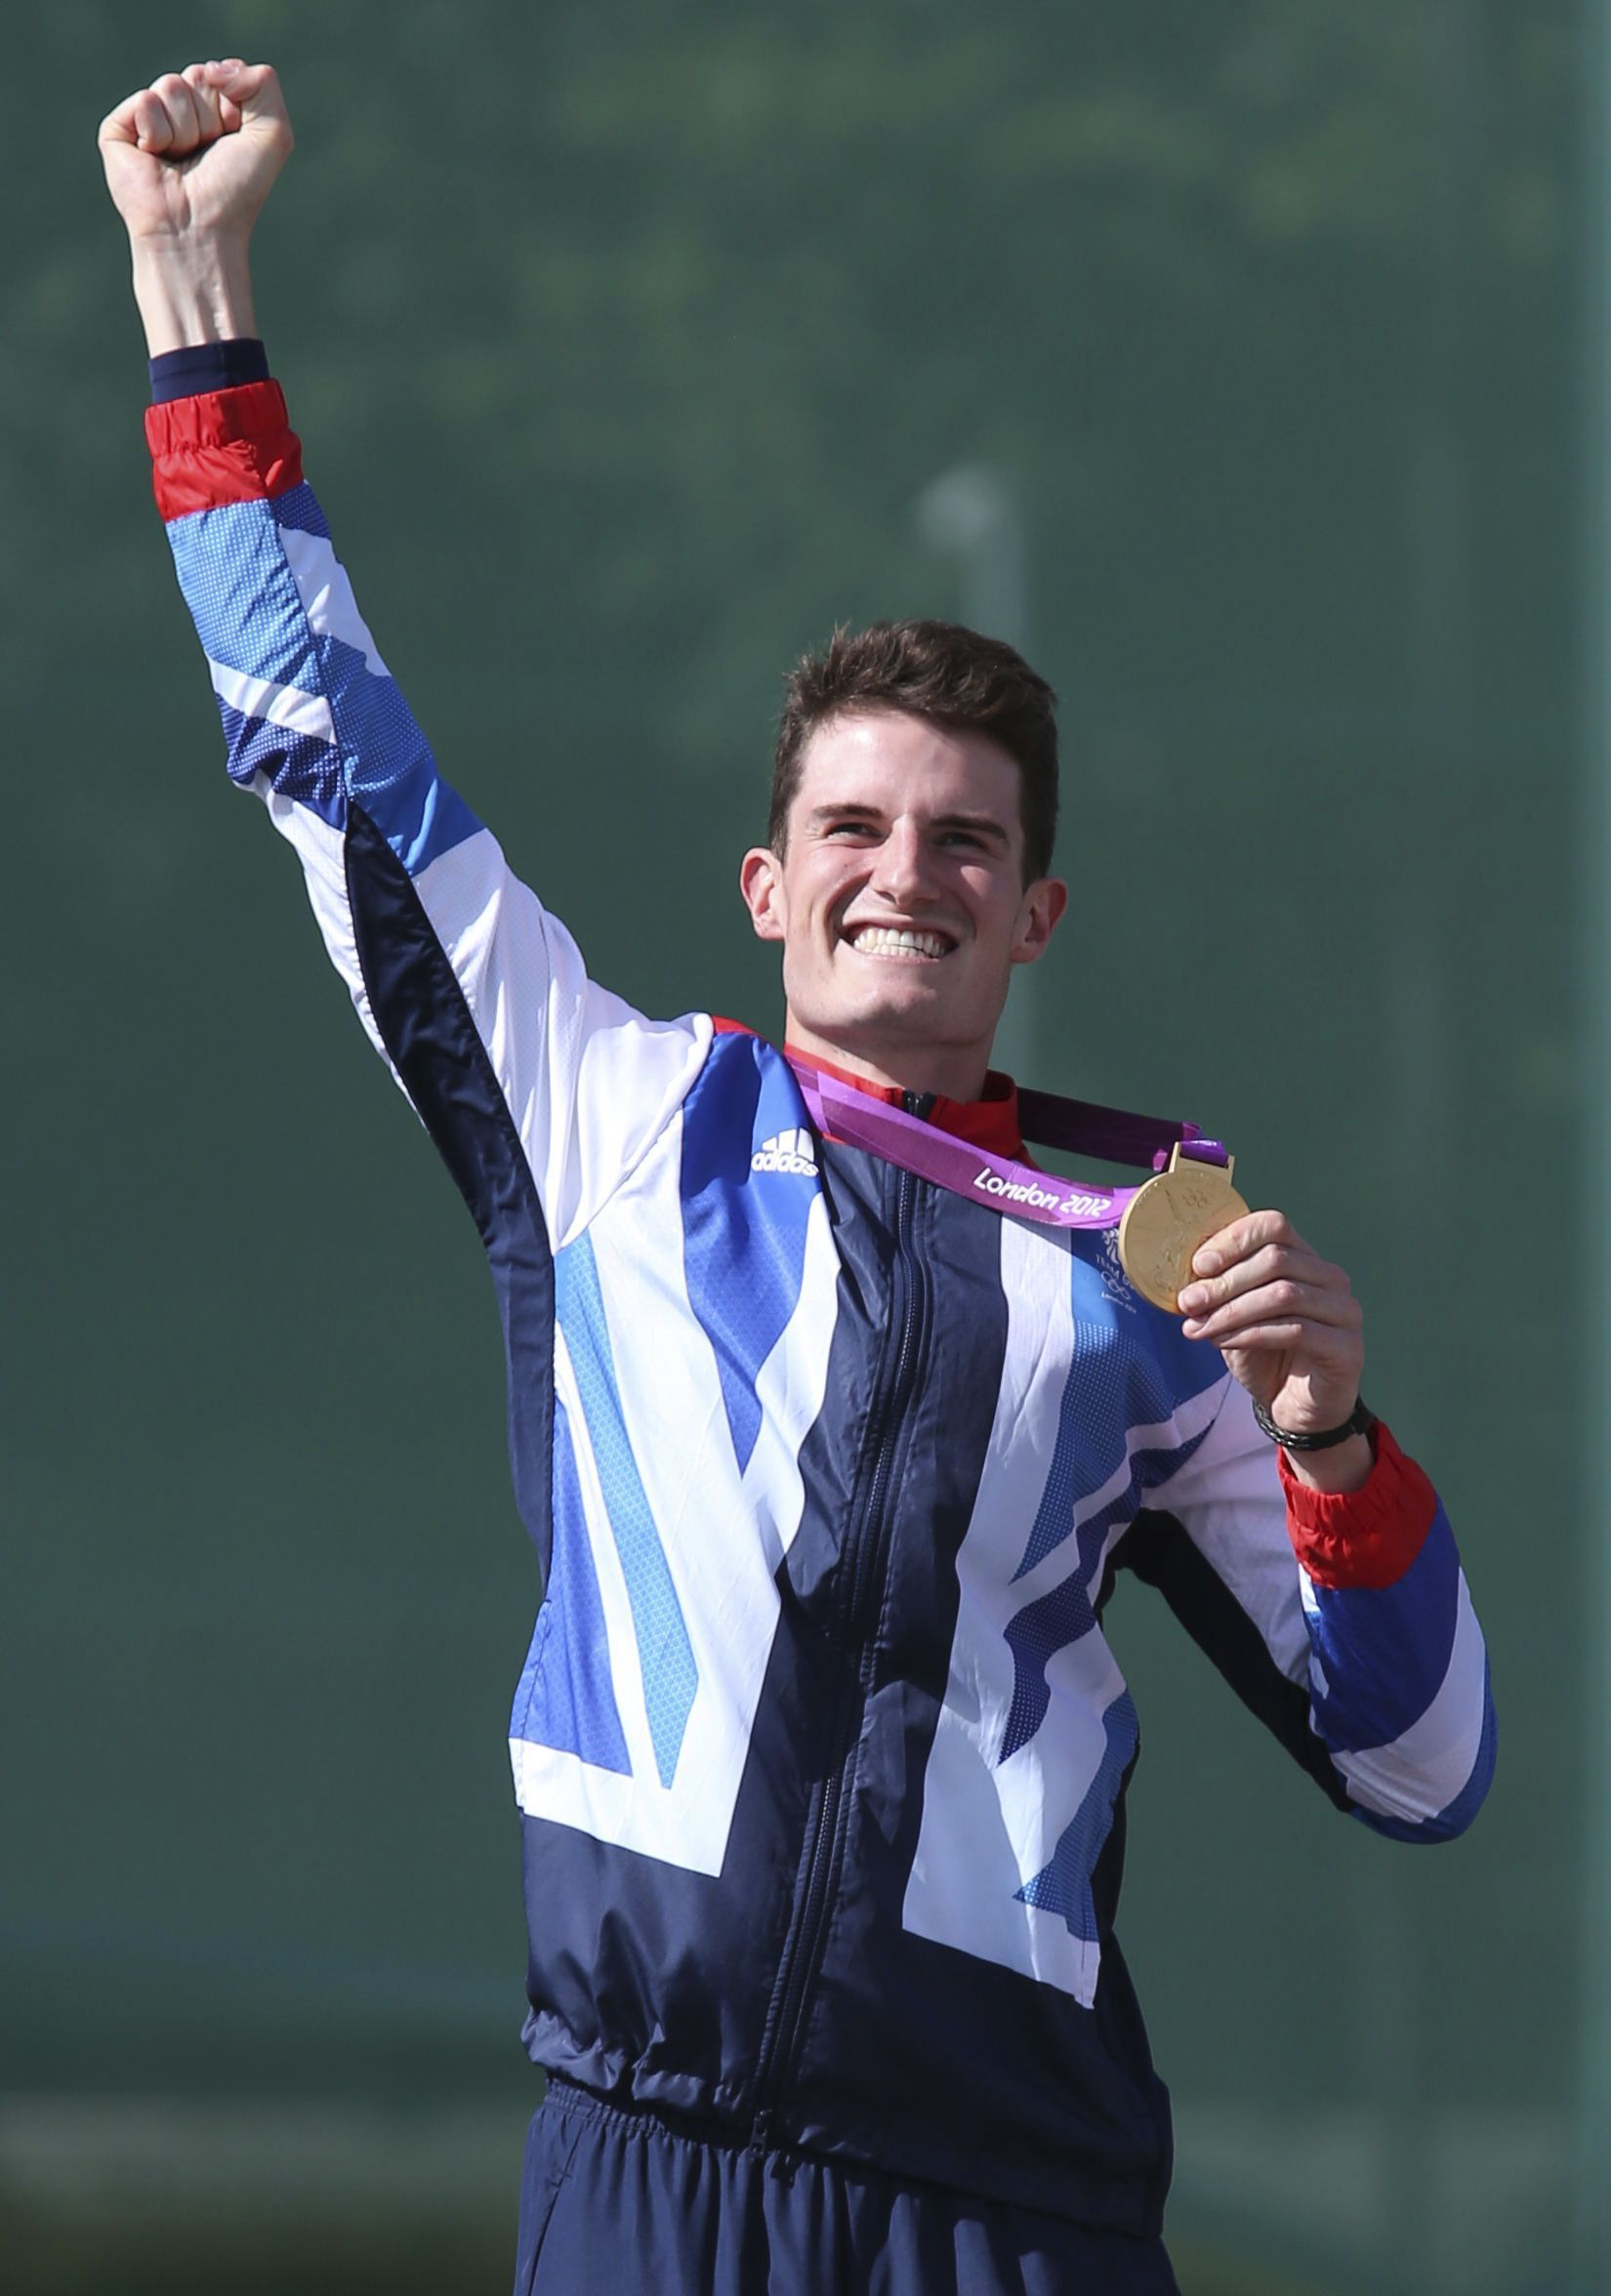 Great Britains Peter Wilson with his gold medal after winning the Double Trap Mens Final at the Royal Artillery Barracks, London. PRESS ASSOCIATION Photo. Picture date: Thursday August 2, 2012. See PA story OLYMPICS Shooting. Photo credit should read: